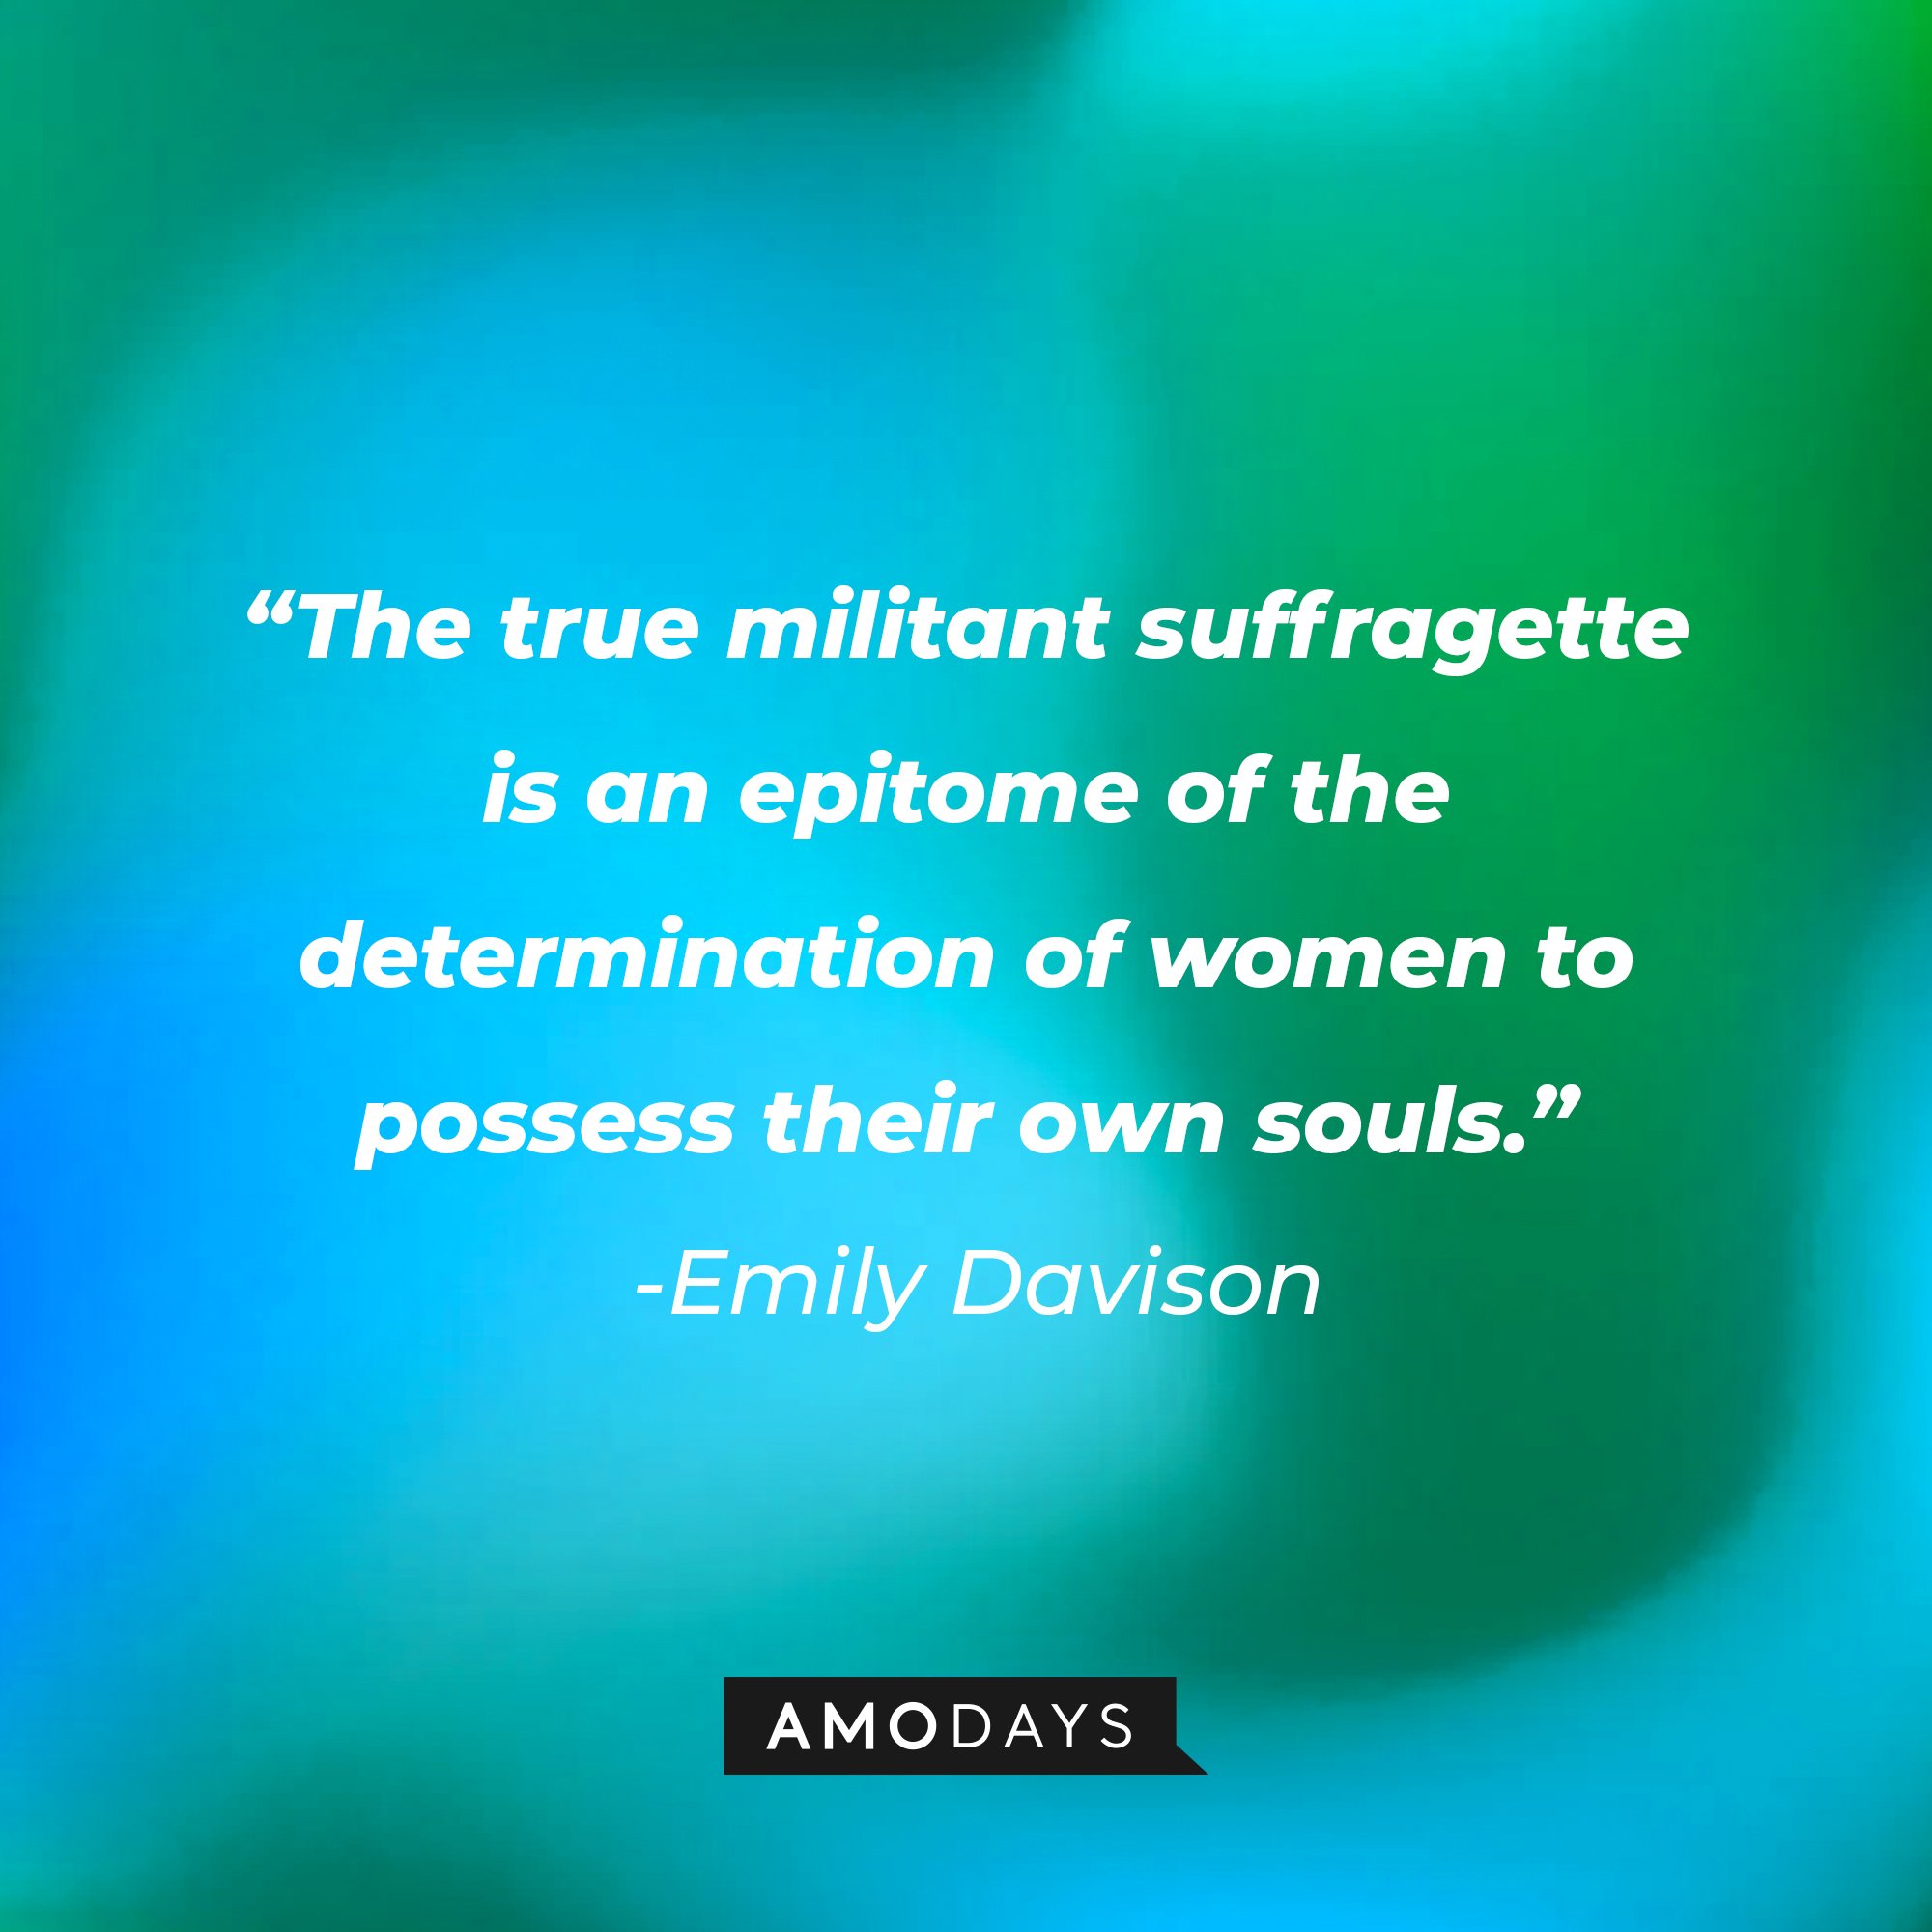   Emily Davison’s quote: "The true militant suffragette is an epitome of the determination of women to possess their own souls." | Image: AmoDays